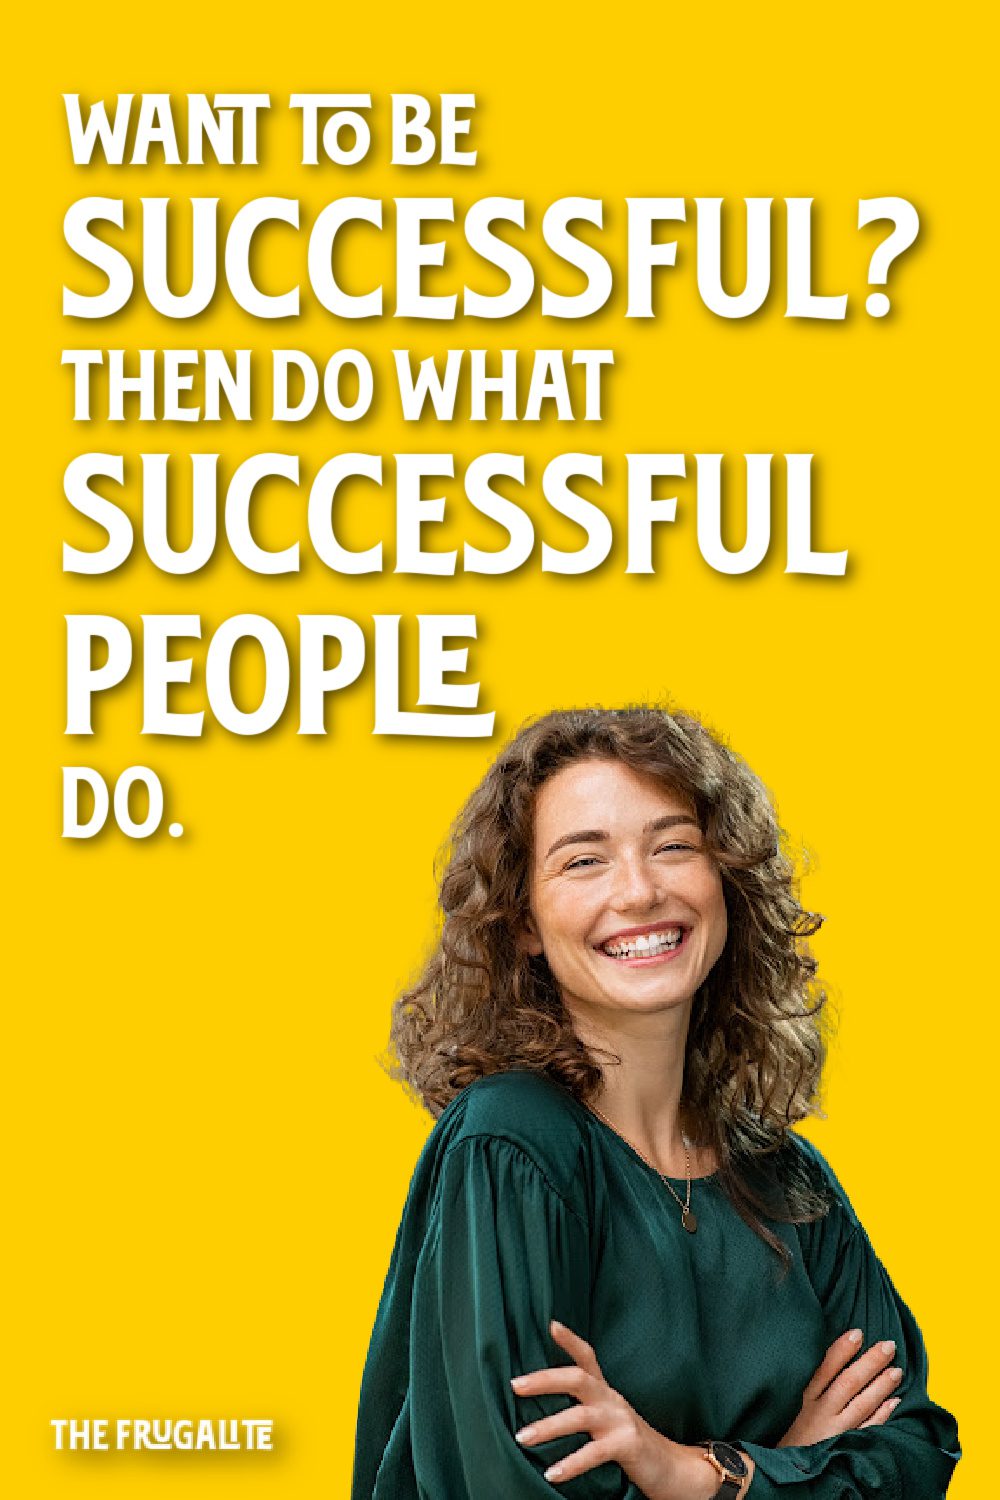 Want to Be Successful? Then Do What Successful People Do.